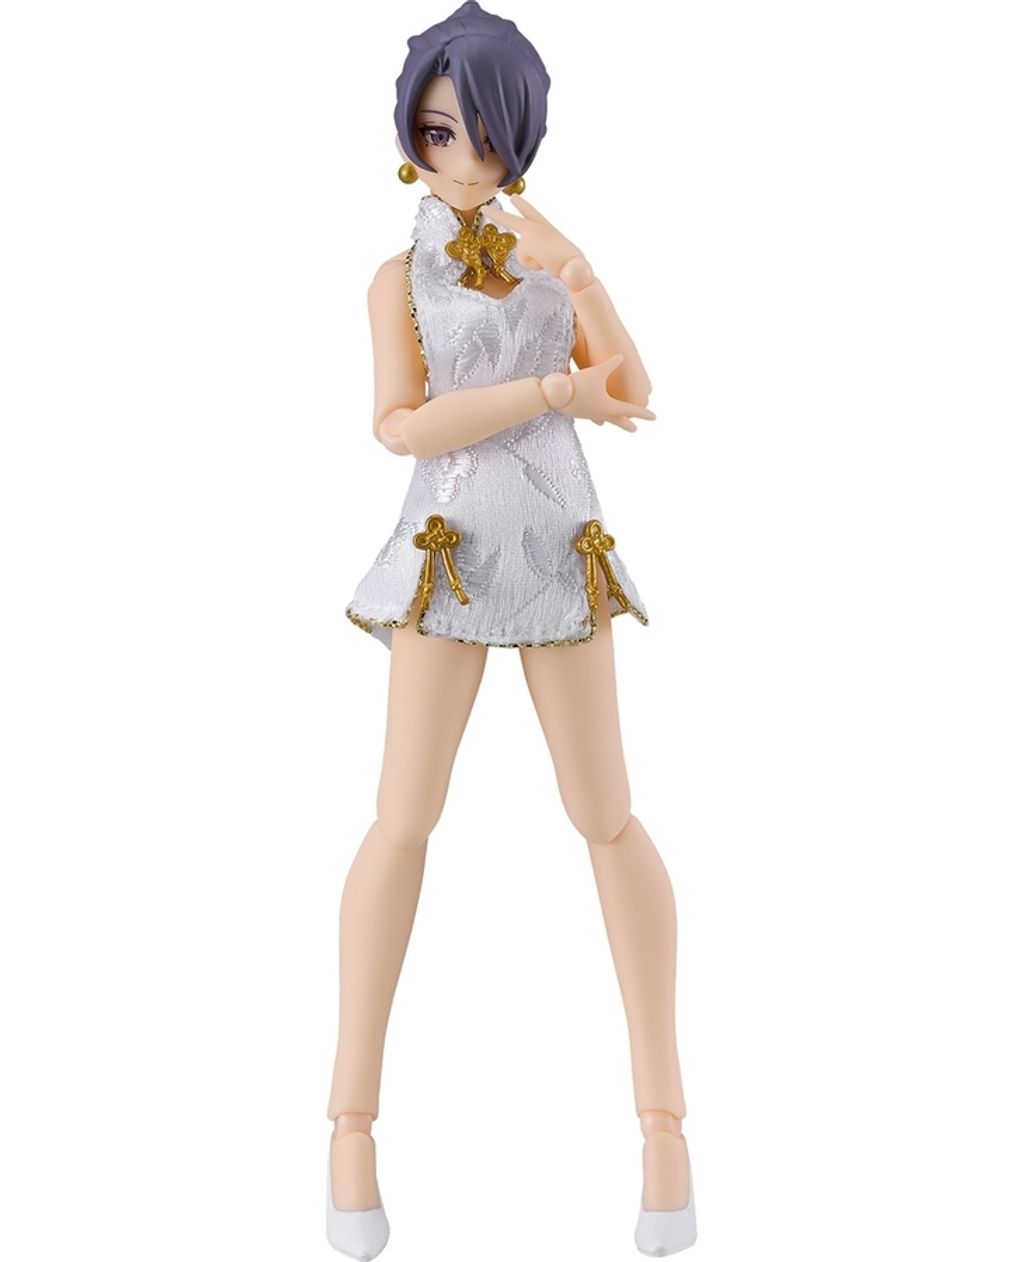 figma Female Body (Mika) with Mini Skirt Chinese Dress Outfit (White)